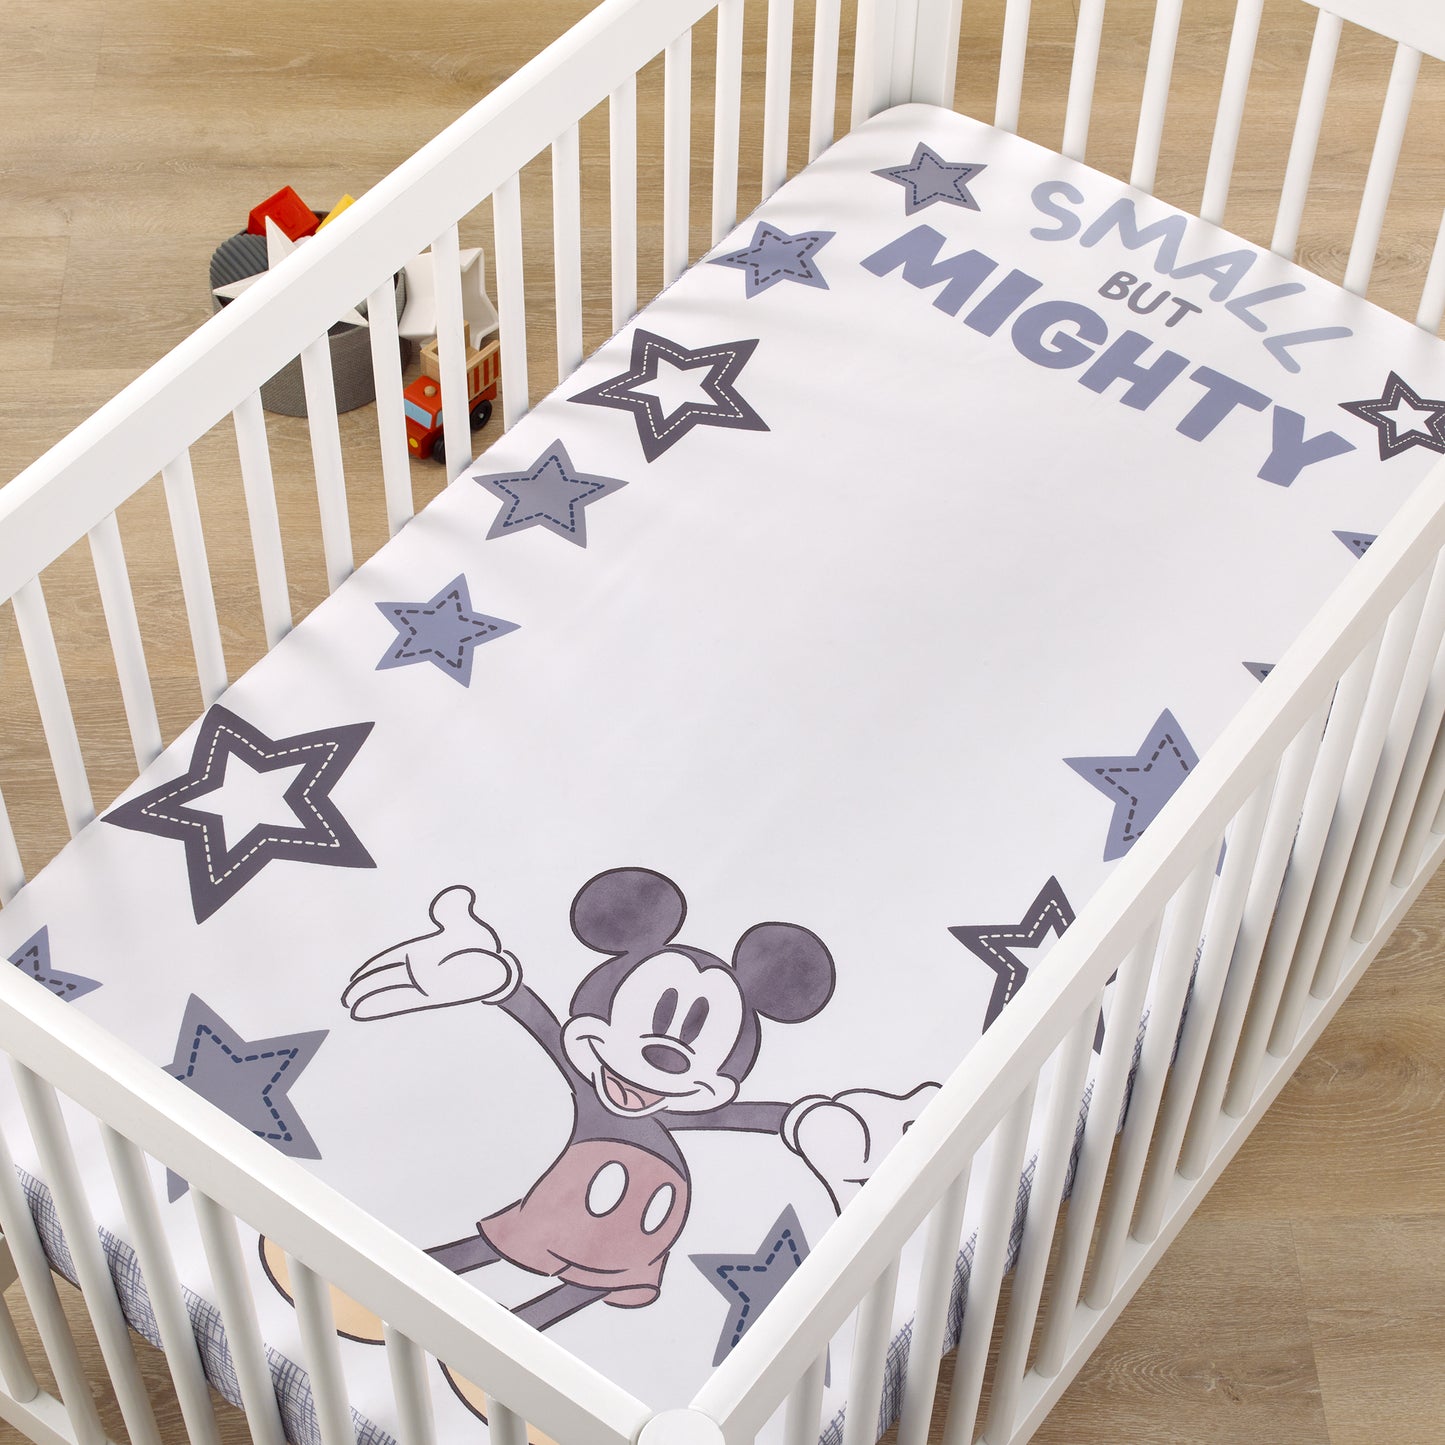 Disney Mickey Mouse Mighty Mickey Gray, Blue, Red and Yellow "Small But Mighty" Nursery Photo Op Fitted Crib Sheet